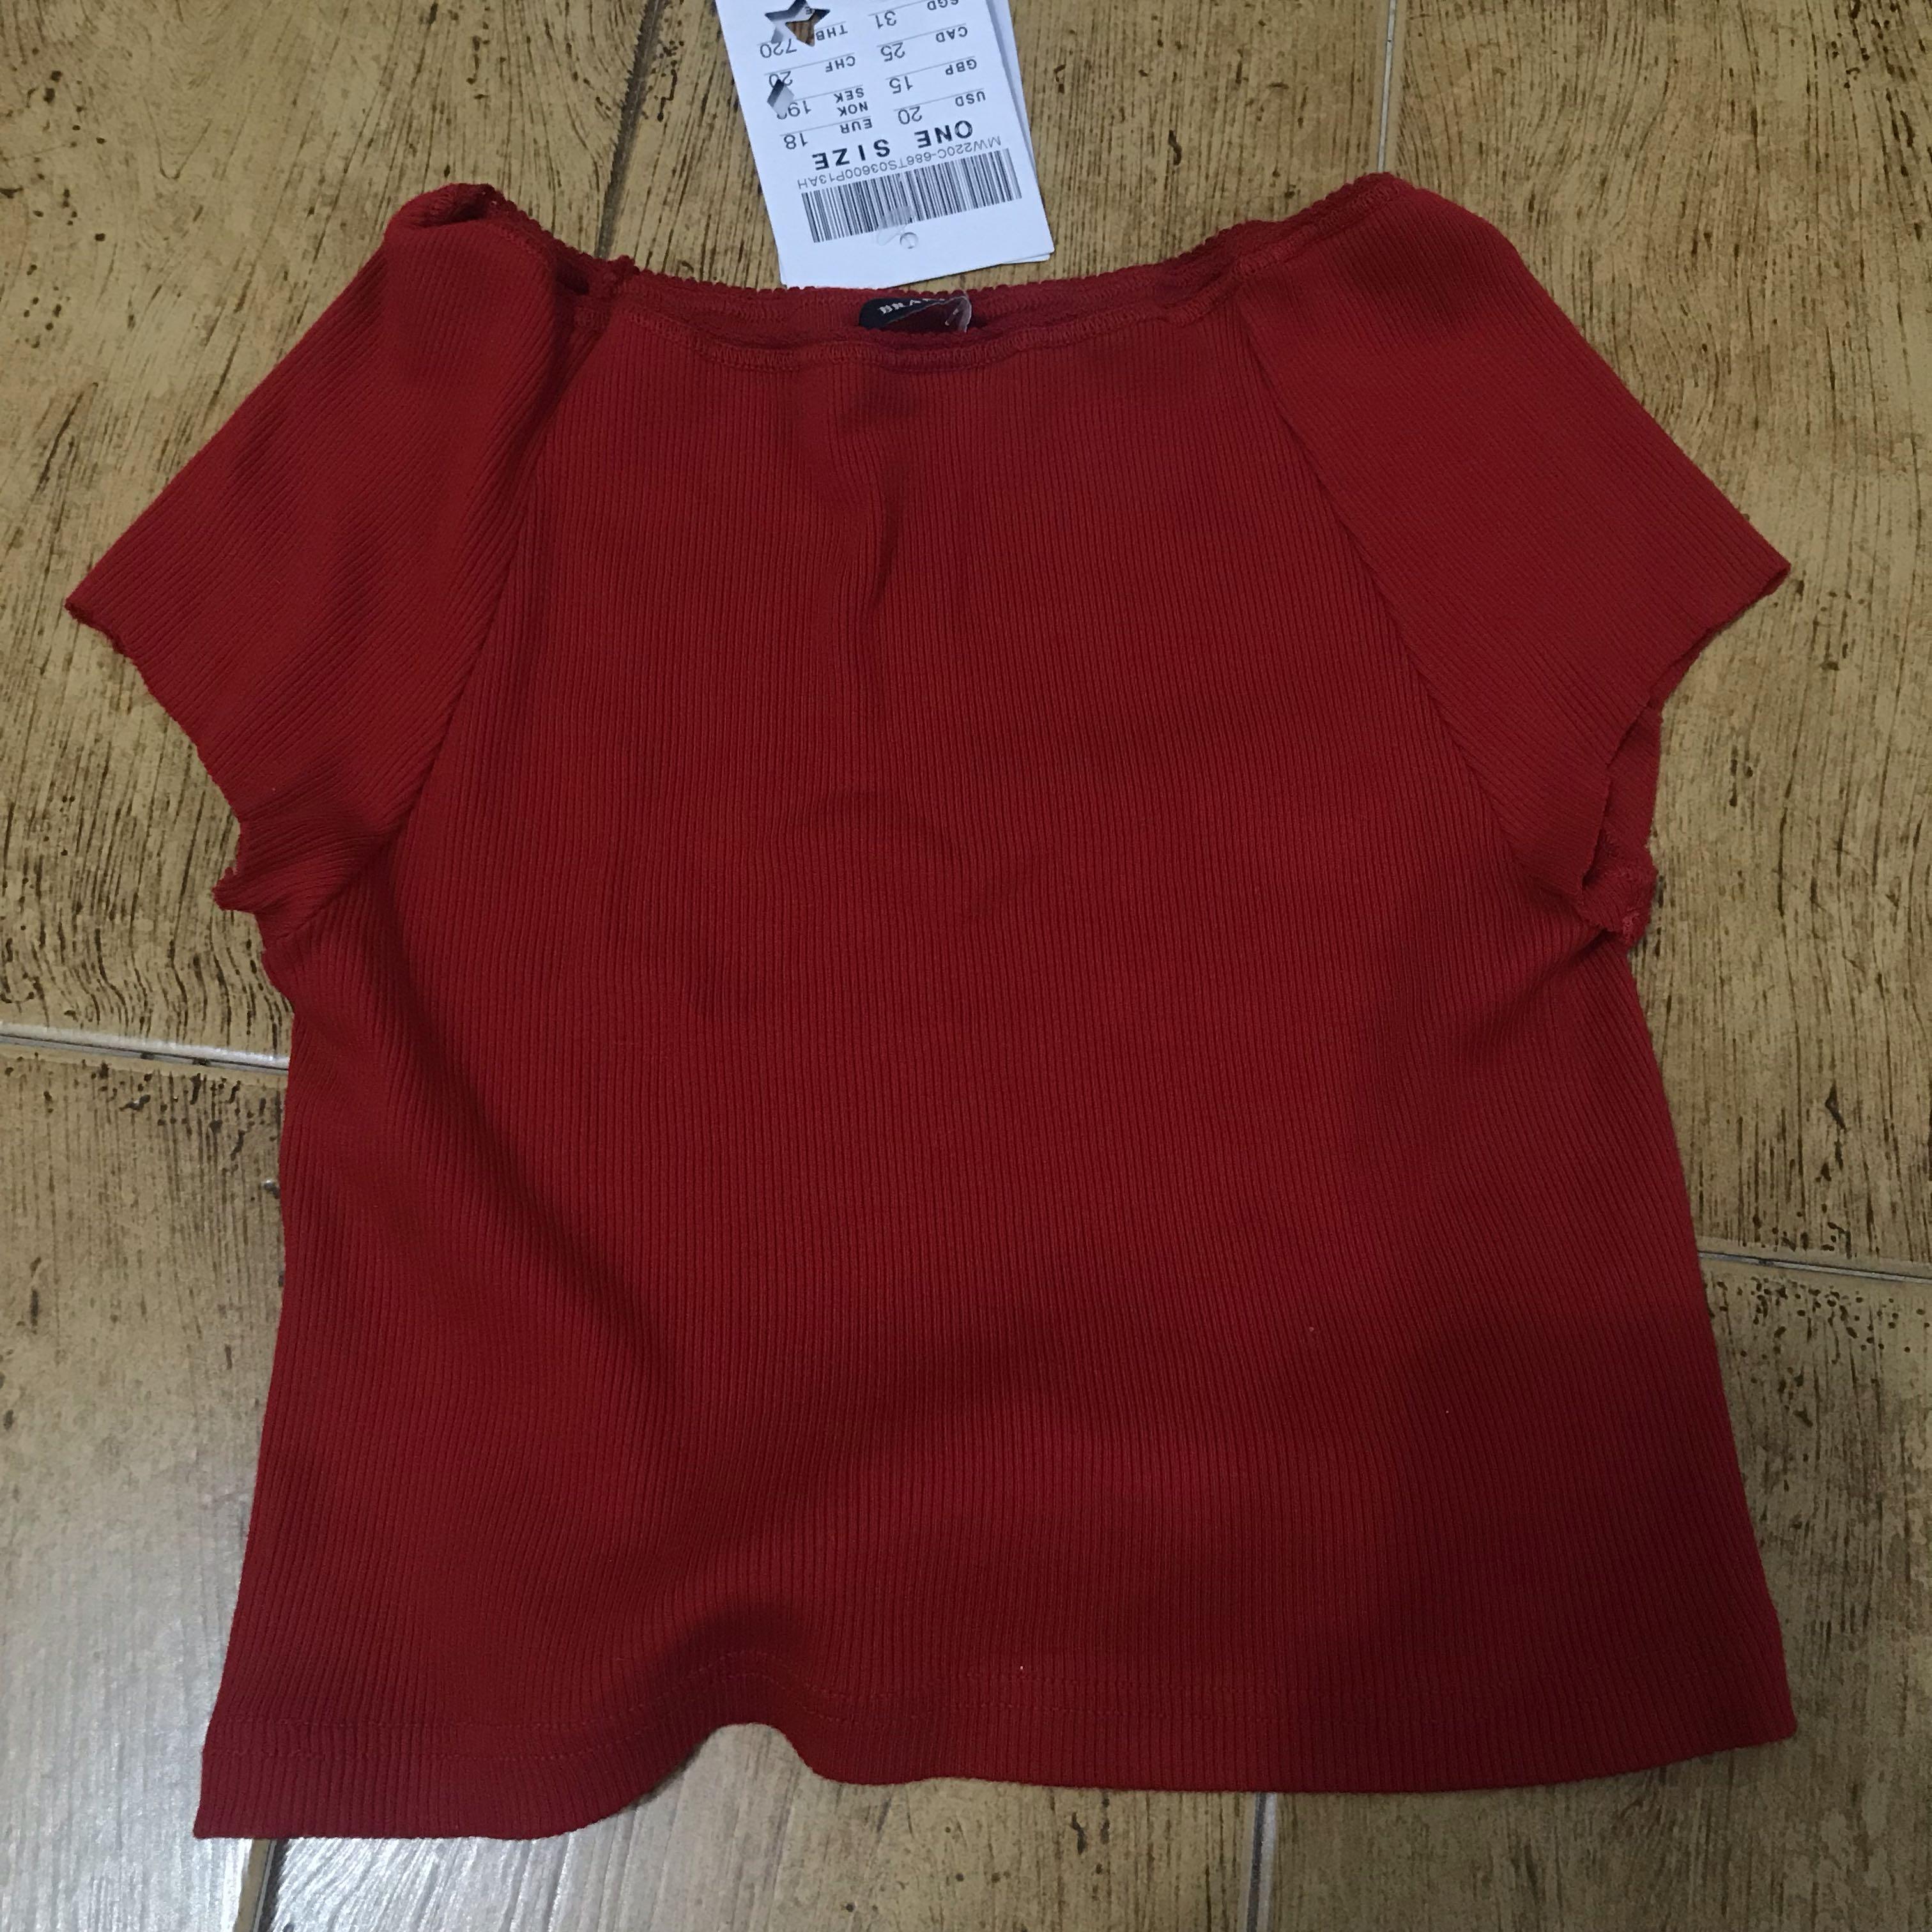 NWT Brandy Melville red Ellery Off Shoulder top, Women's Fashion